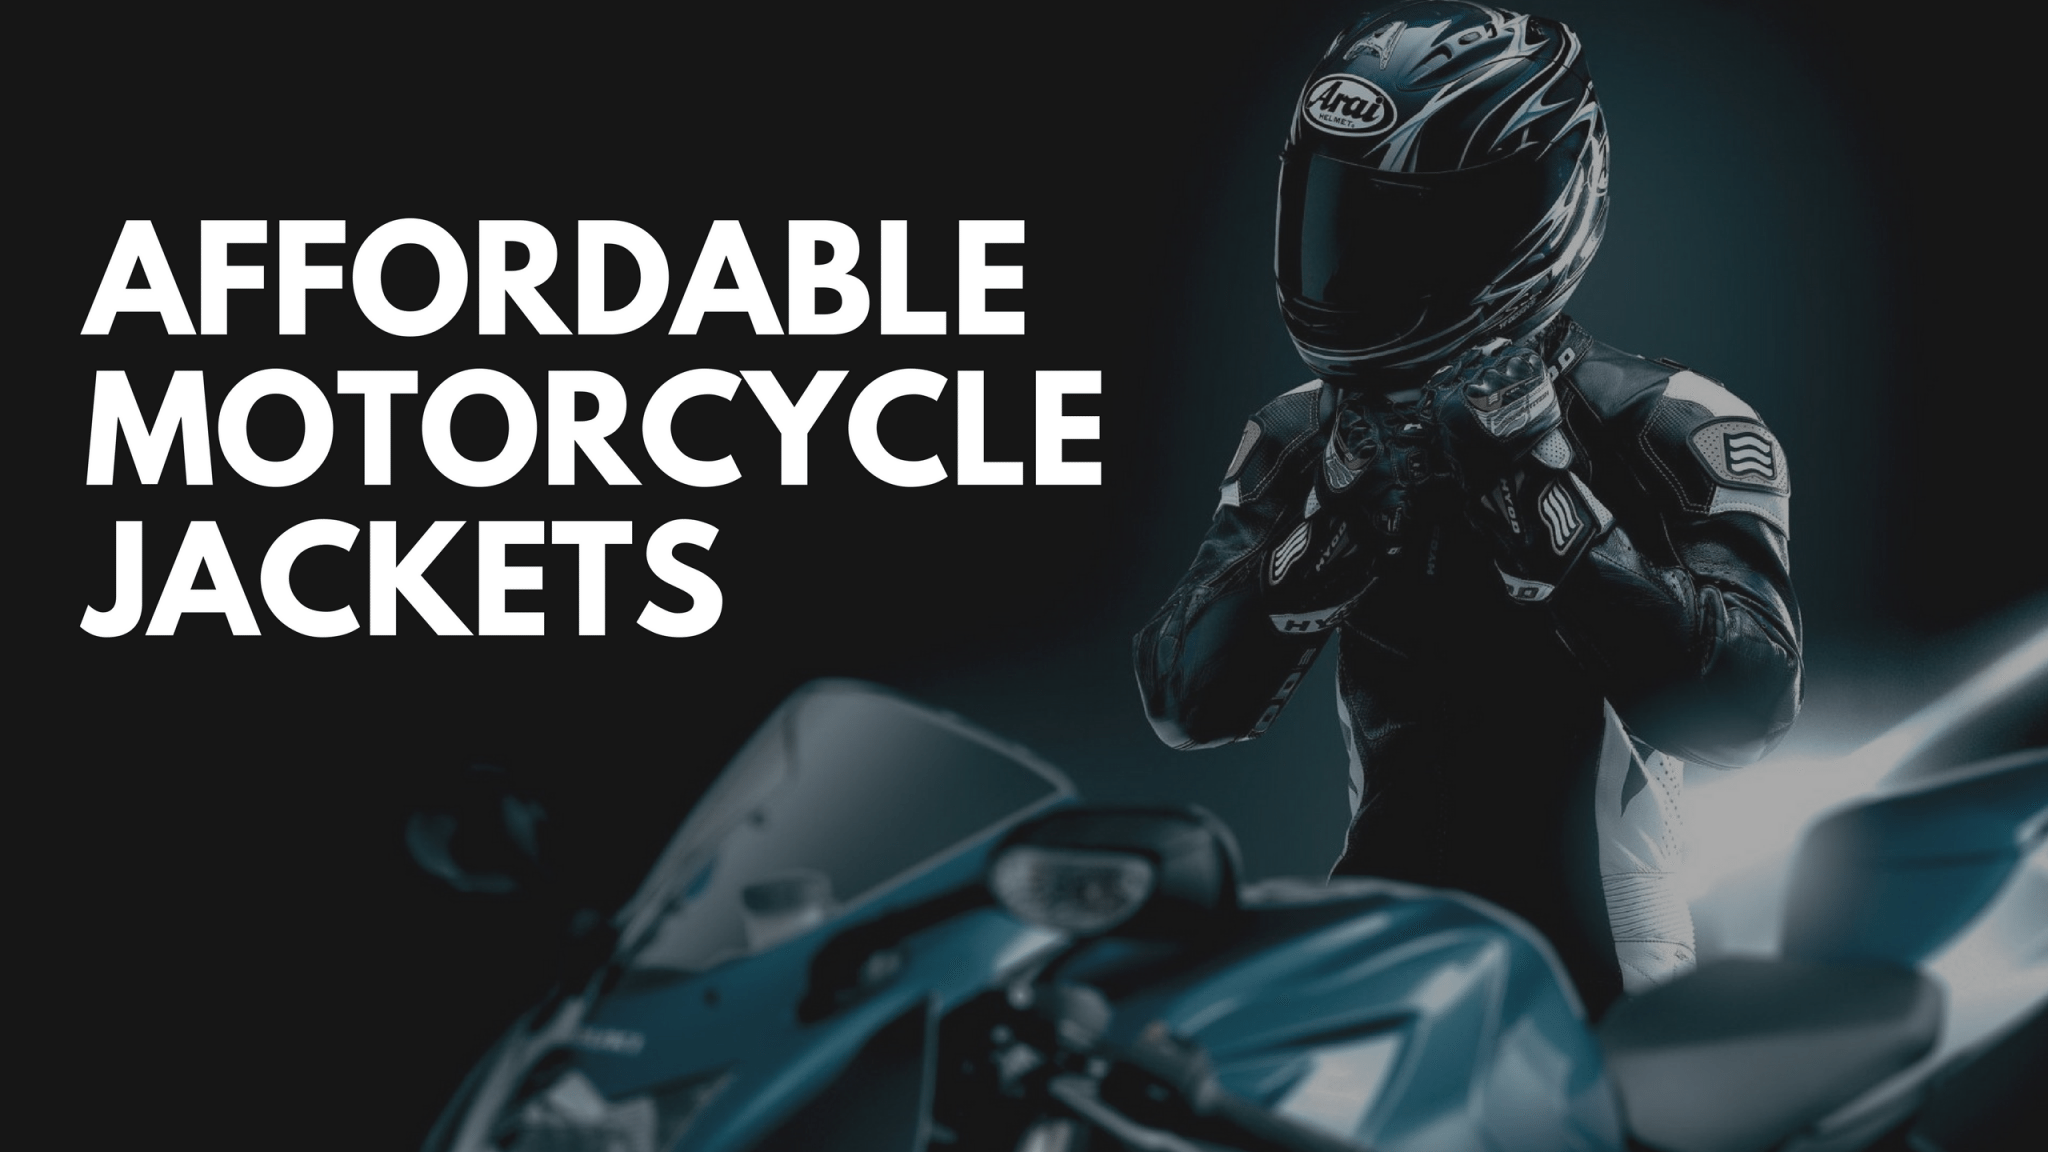 Affordable Motorcycle Jackets for beginners